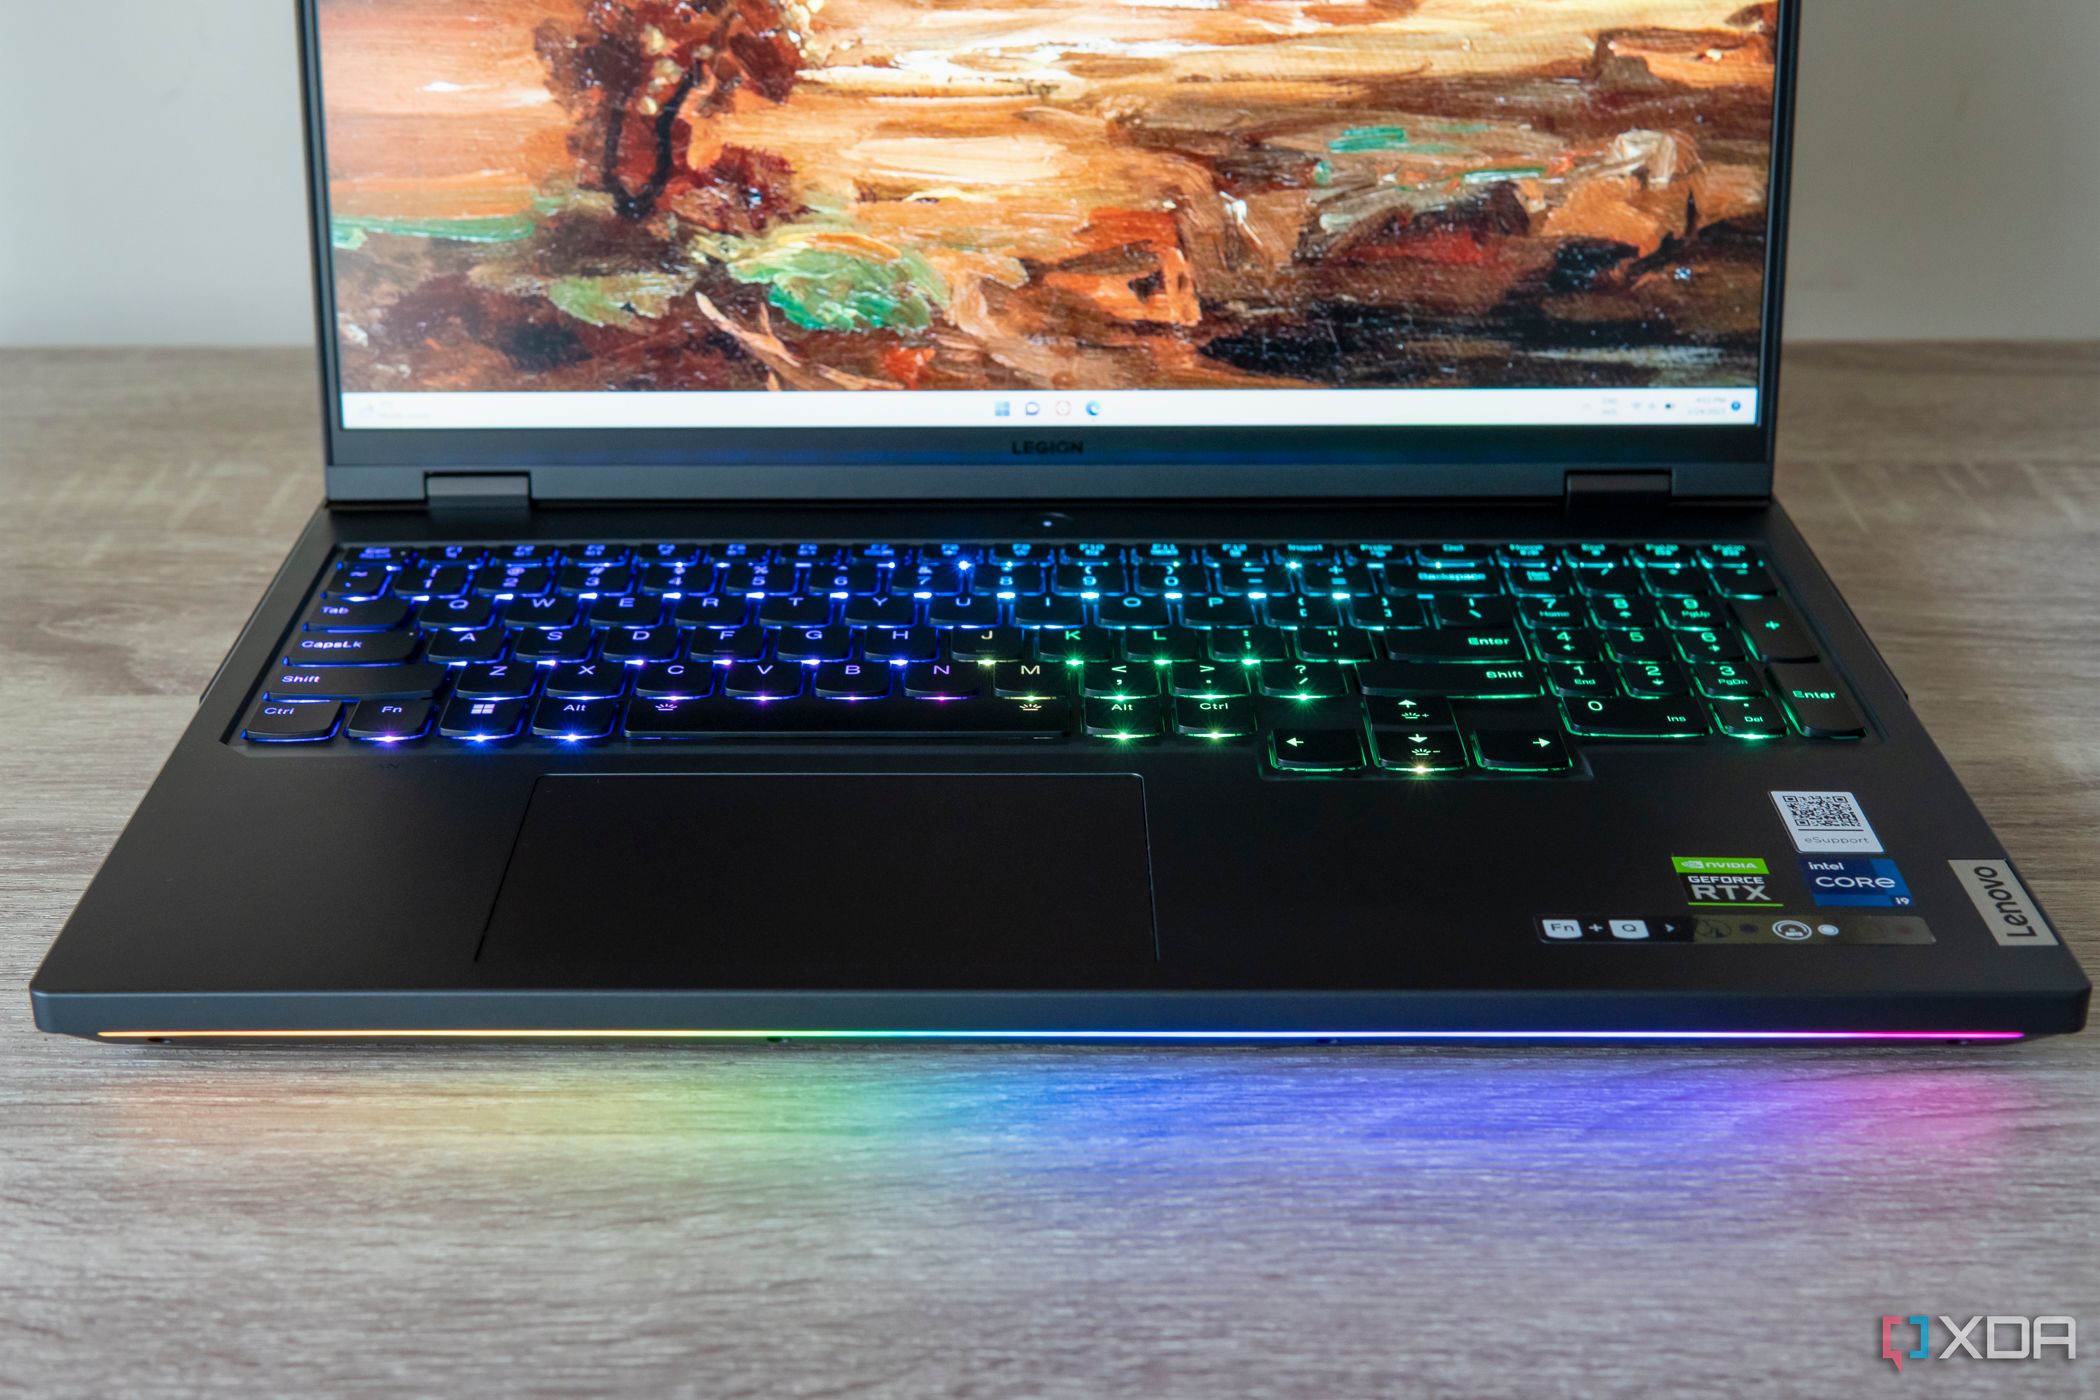 Front view of the Lenovo Legion Pro 7i Gen 8 with an RGB keyboard and light bar displaying rainbow colors